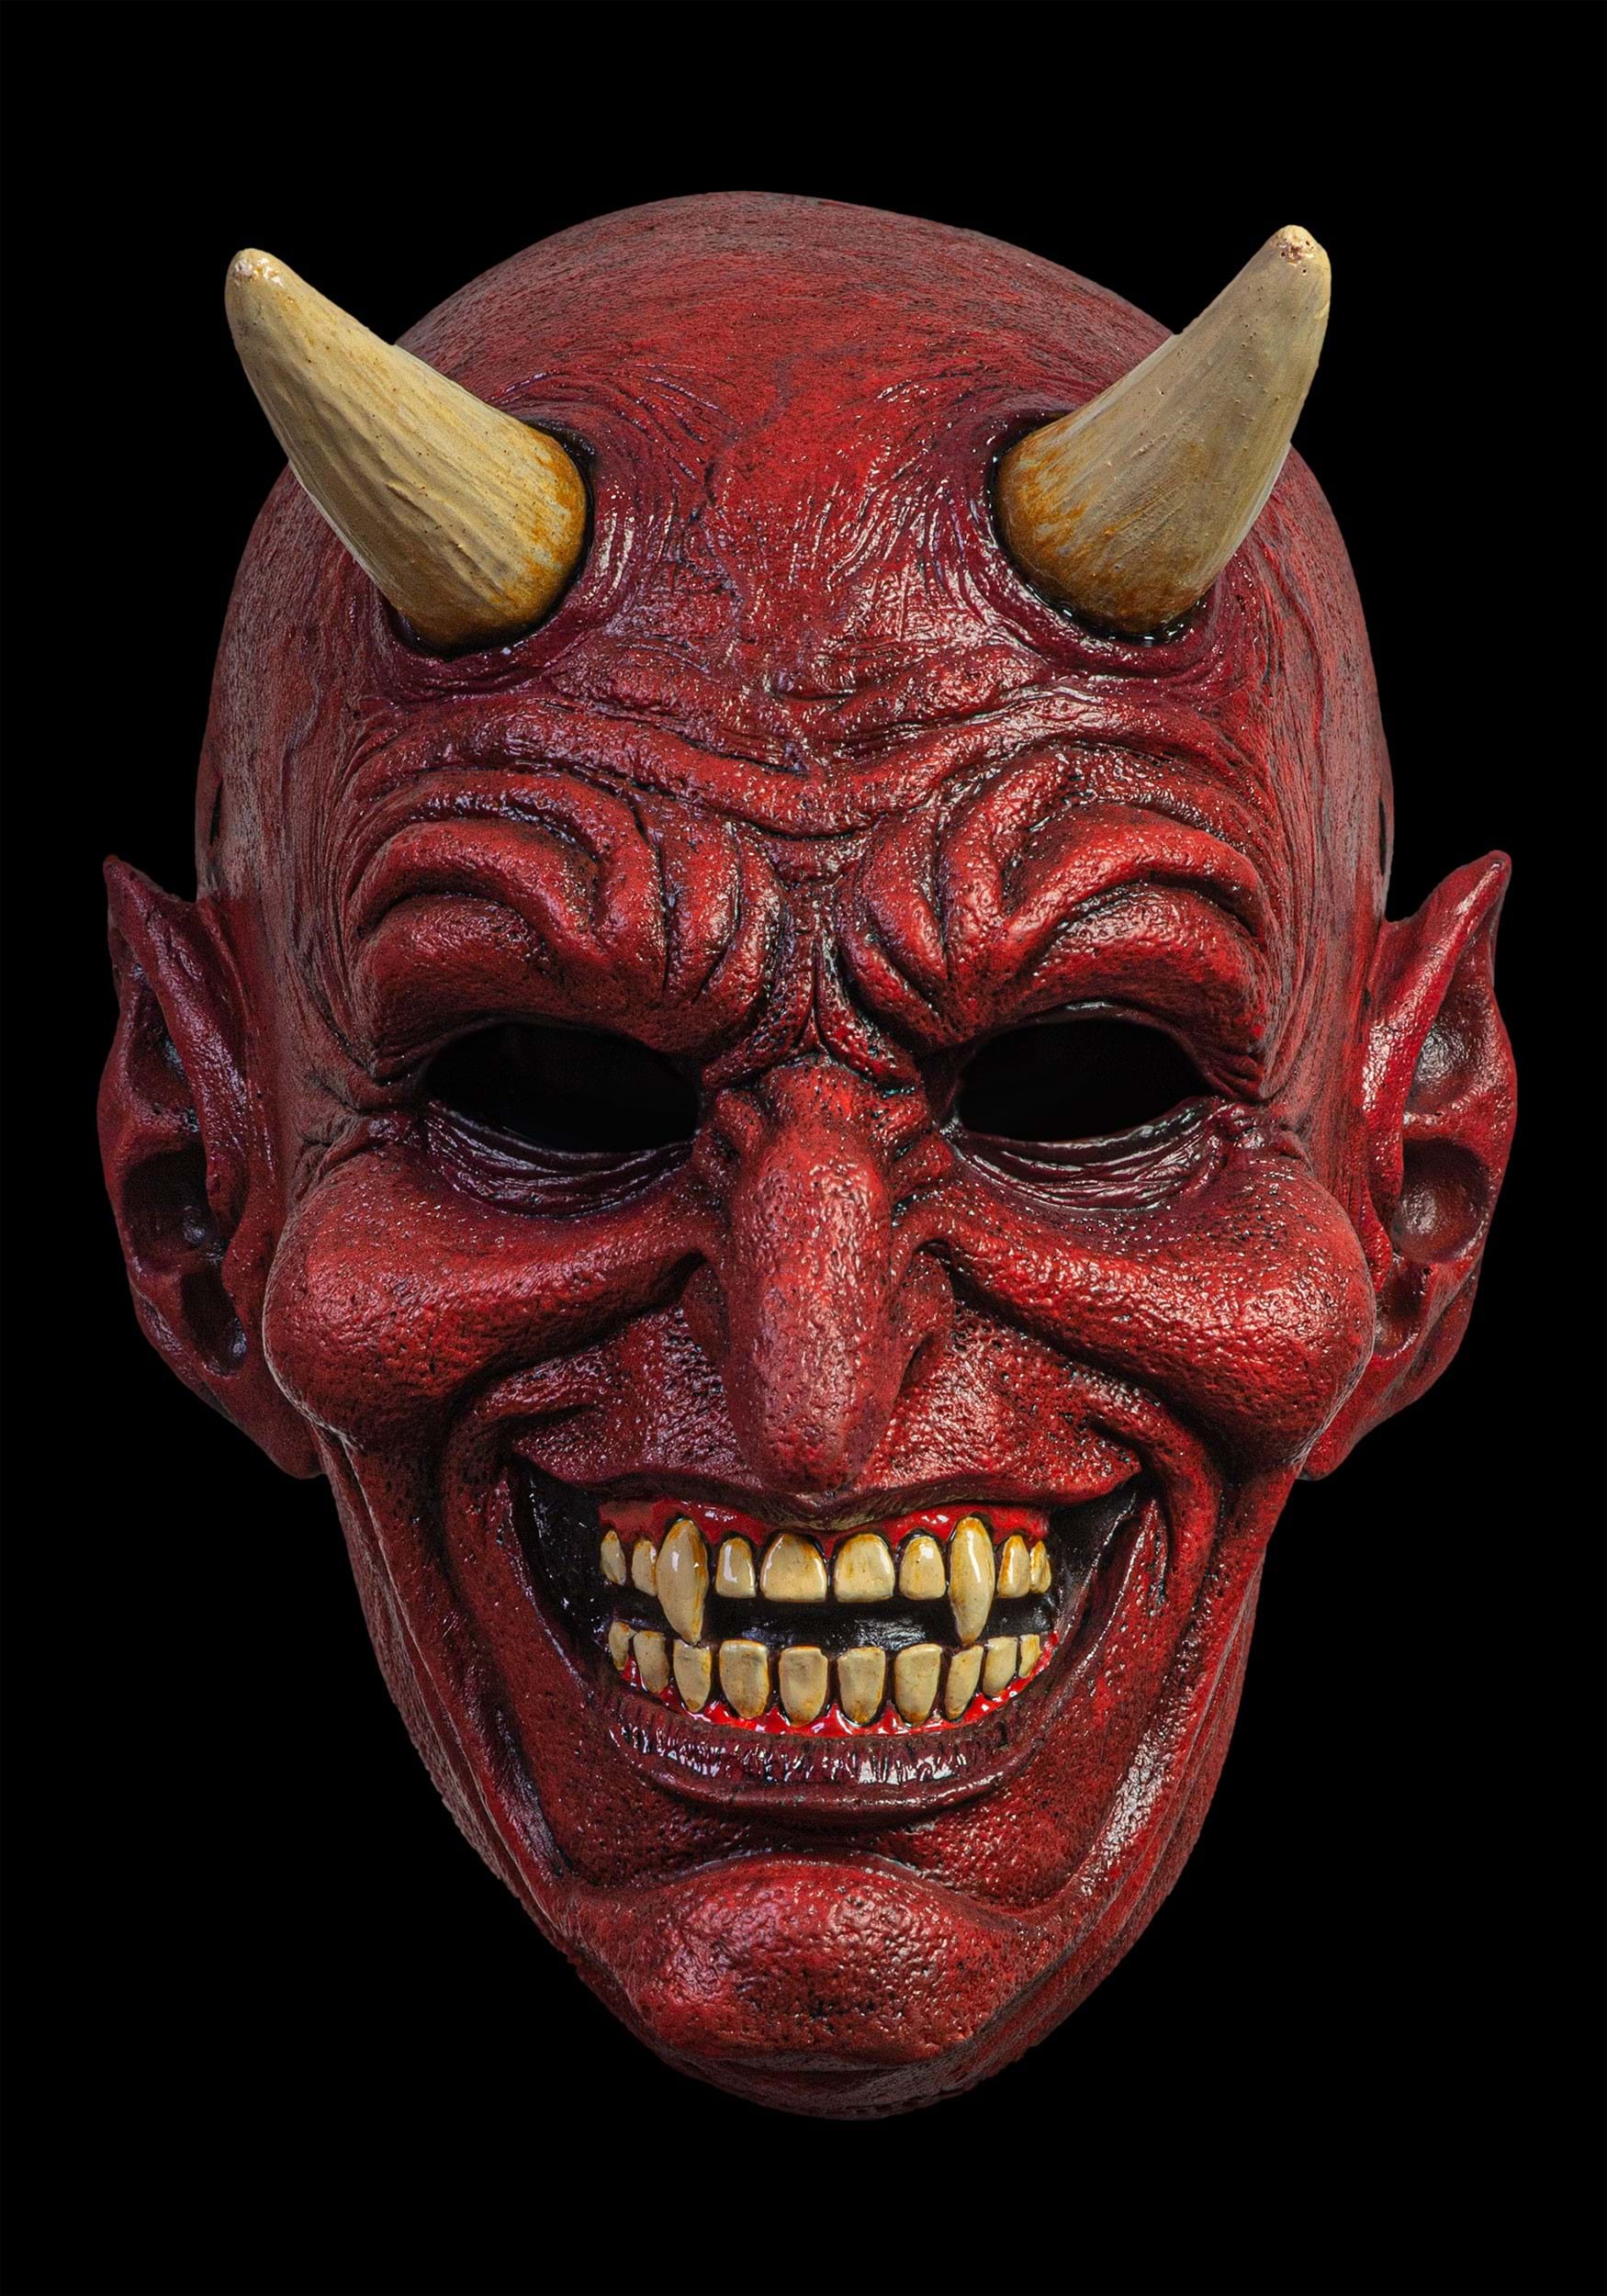 https://images.halloweencostumes.ca/products/83209/1-1/adult-the-devil-full-face-mask.jpg